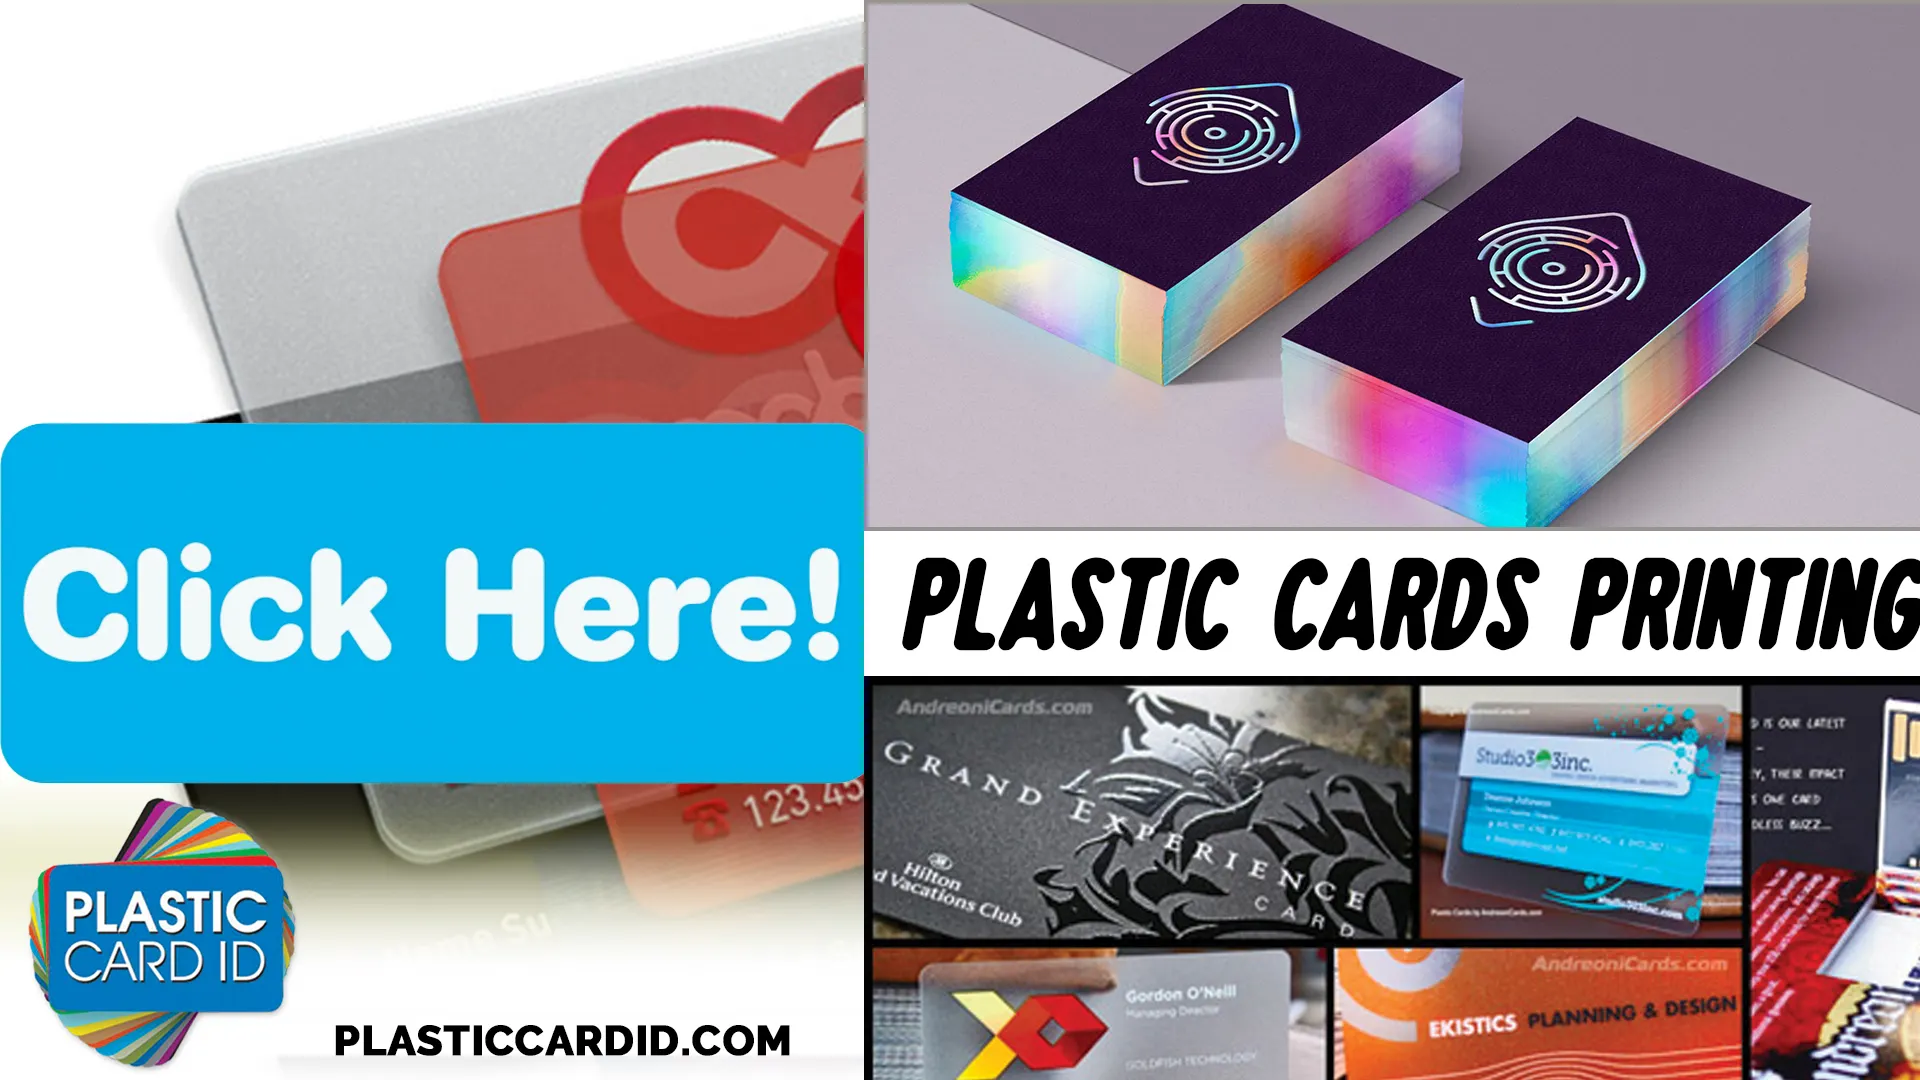 Expanding Your Horizons with Our Plastic Card Solutions